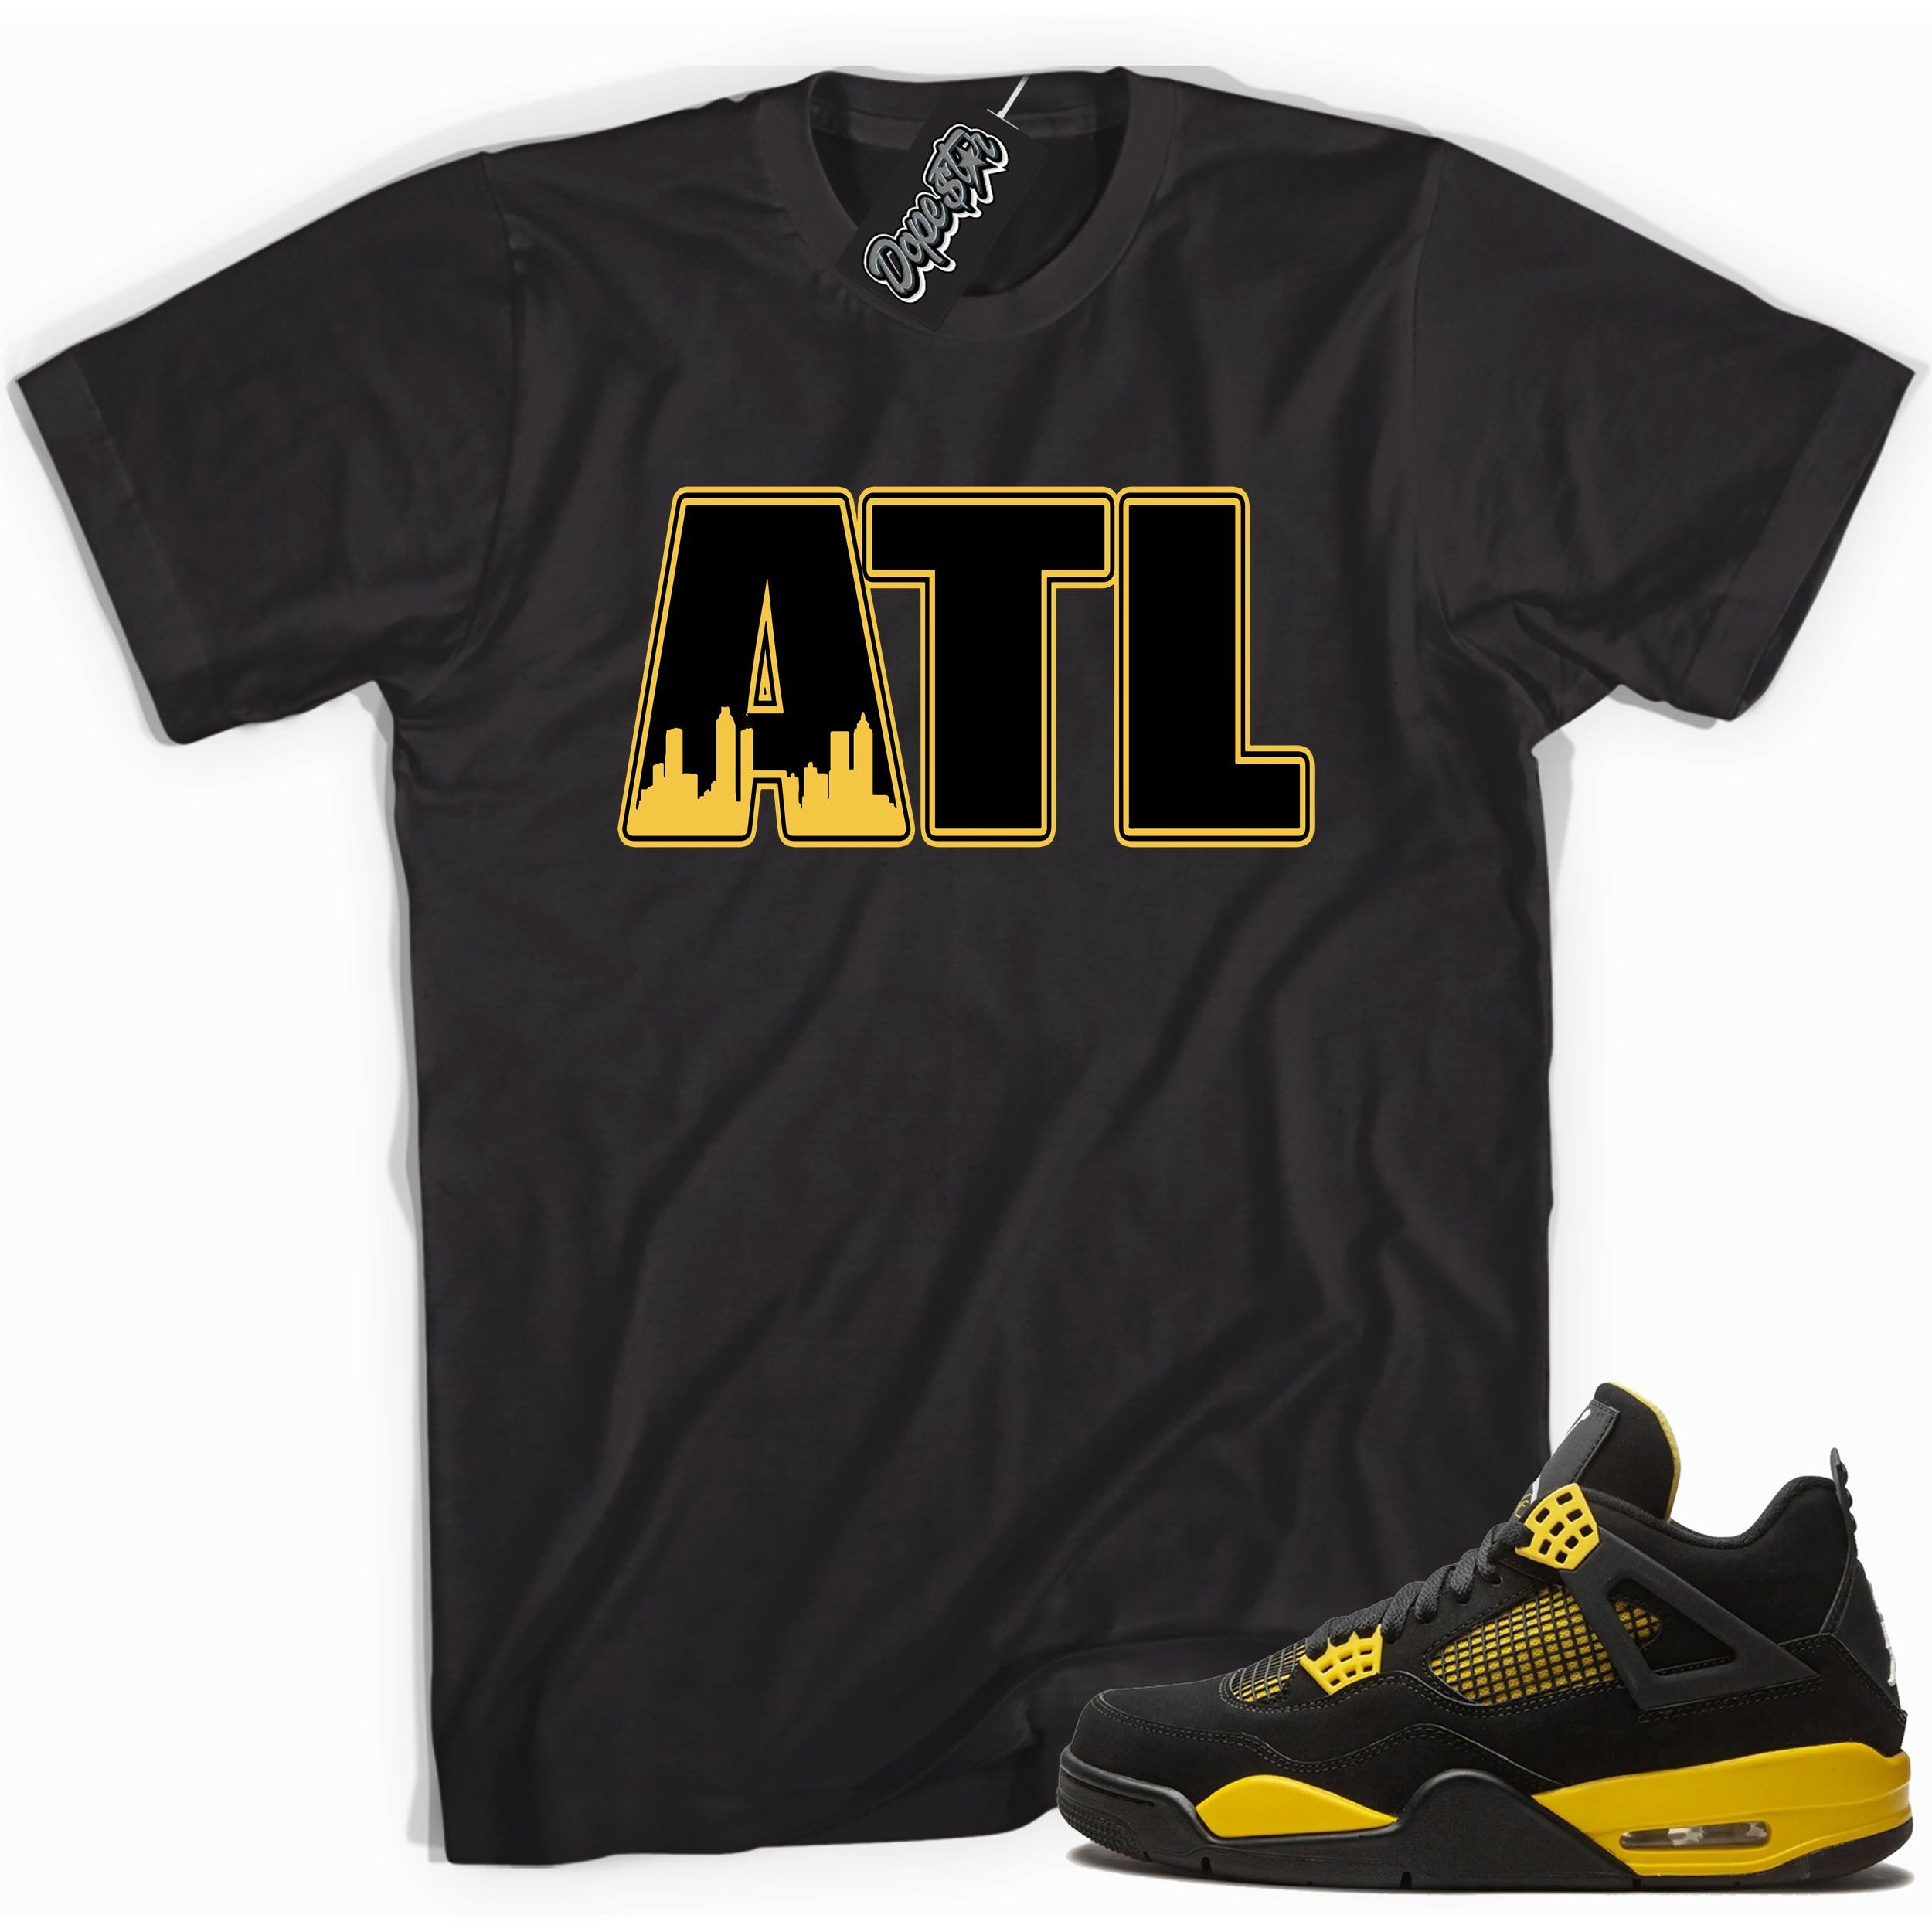 Cool black graphic tee with 'ATL Atlanta' print, that perfectly matches  Air Jordan 4 Thunder sneakers